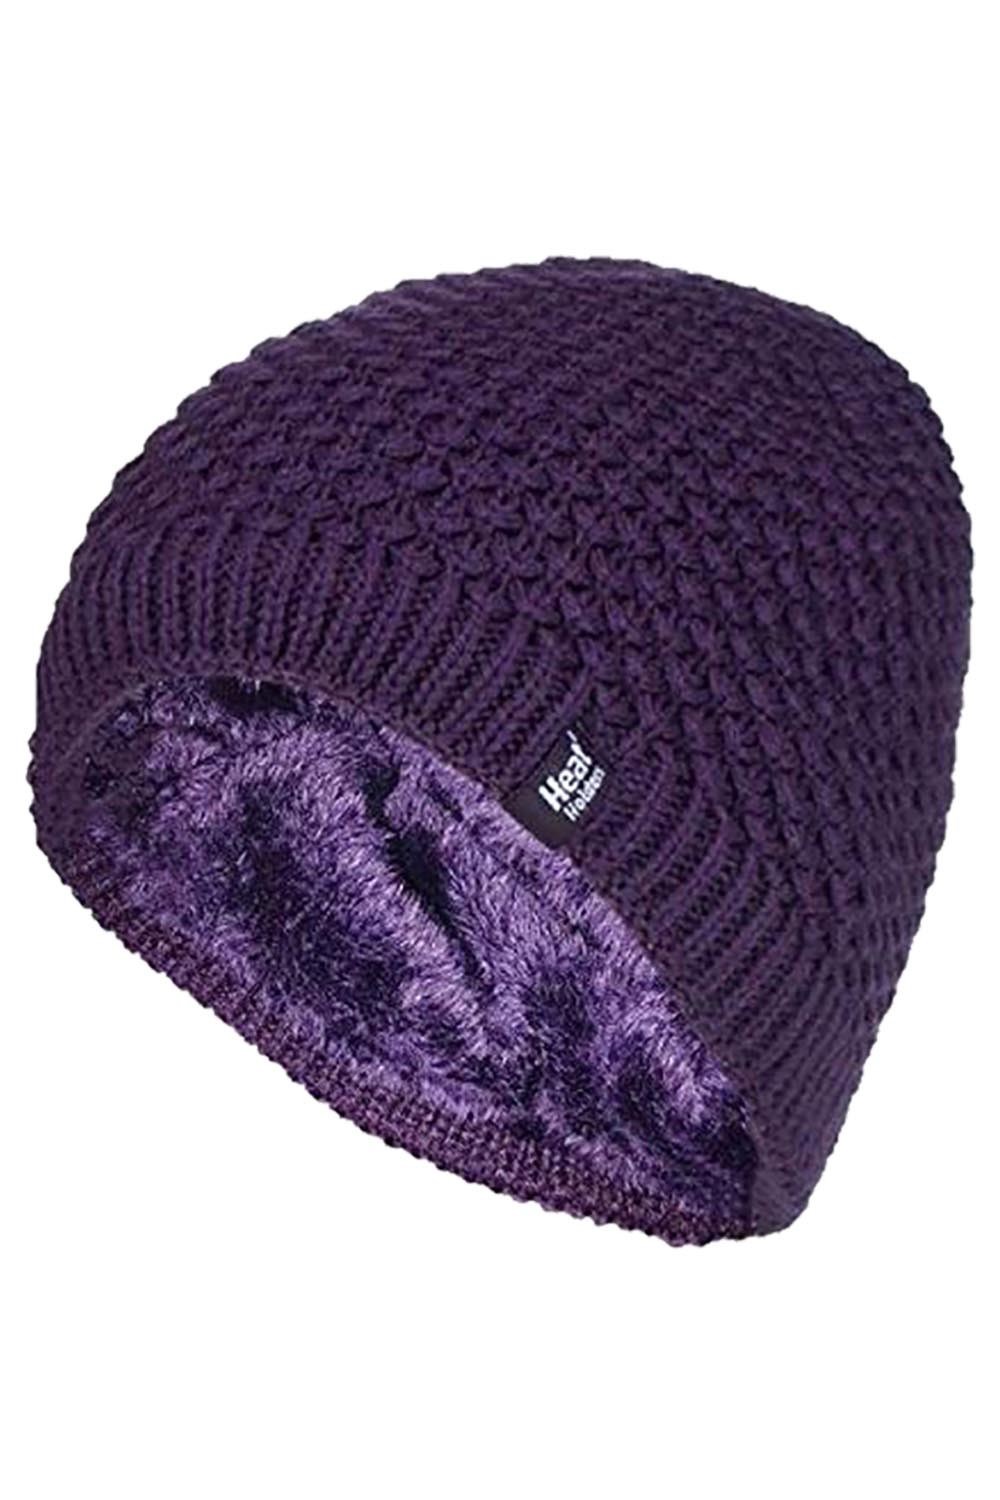 Womens Knit Thermal Beanie Hat -